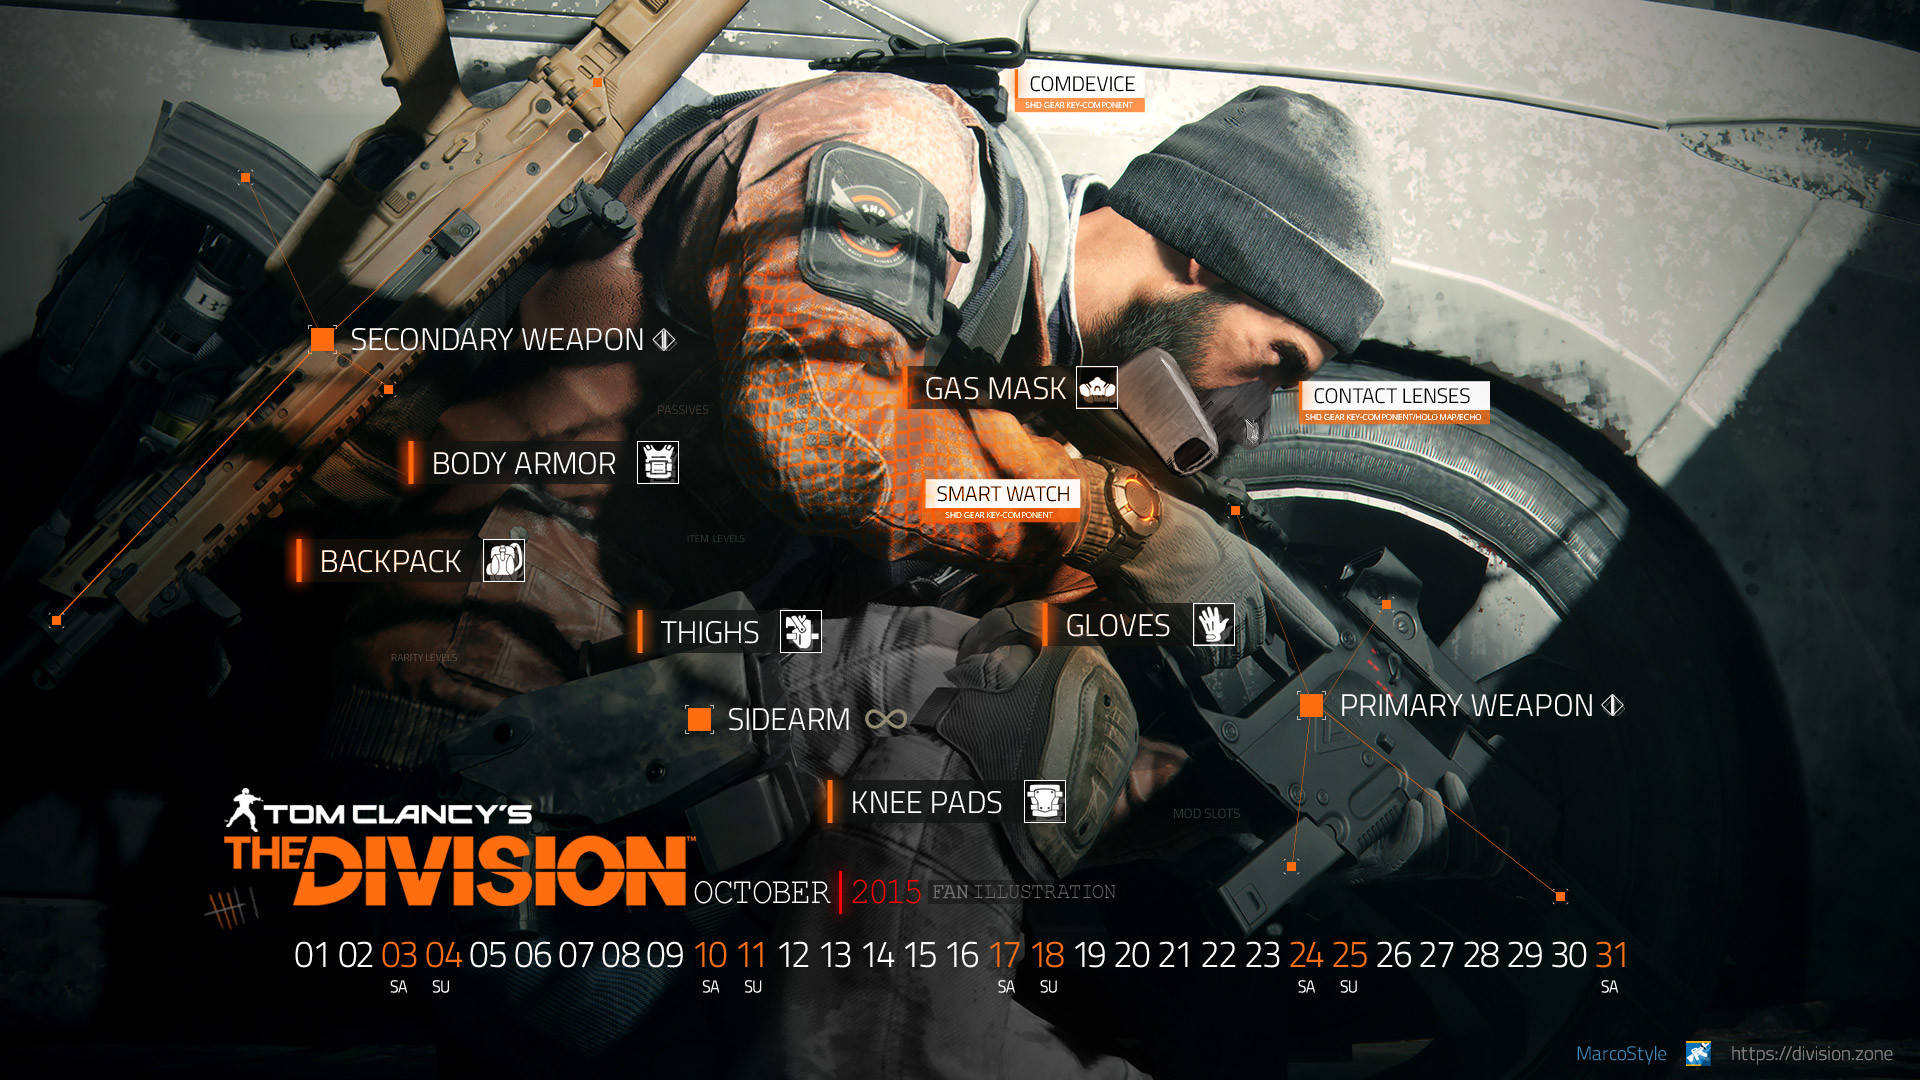 The Division 4k Soldier Hiding Behind Tire Background